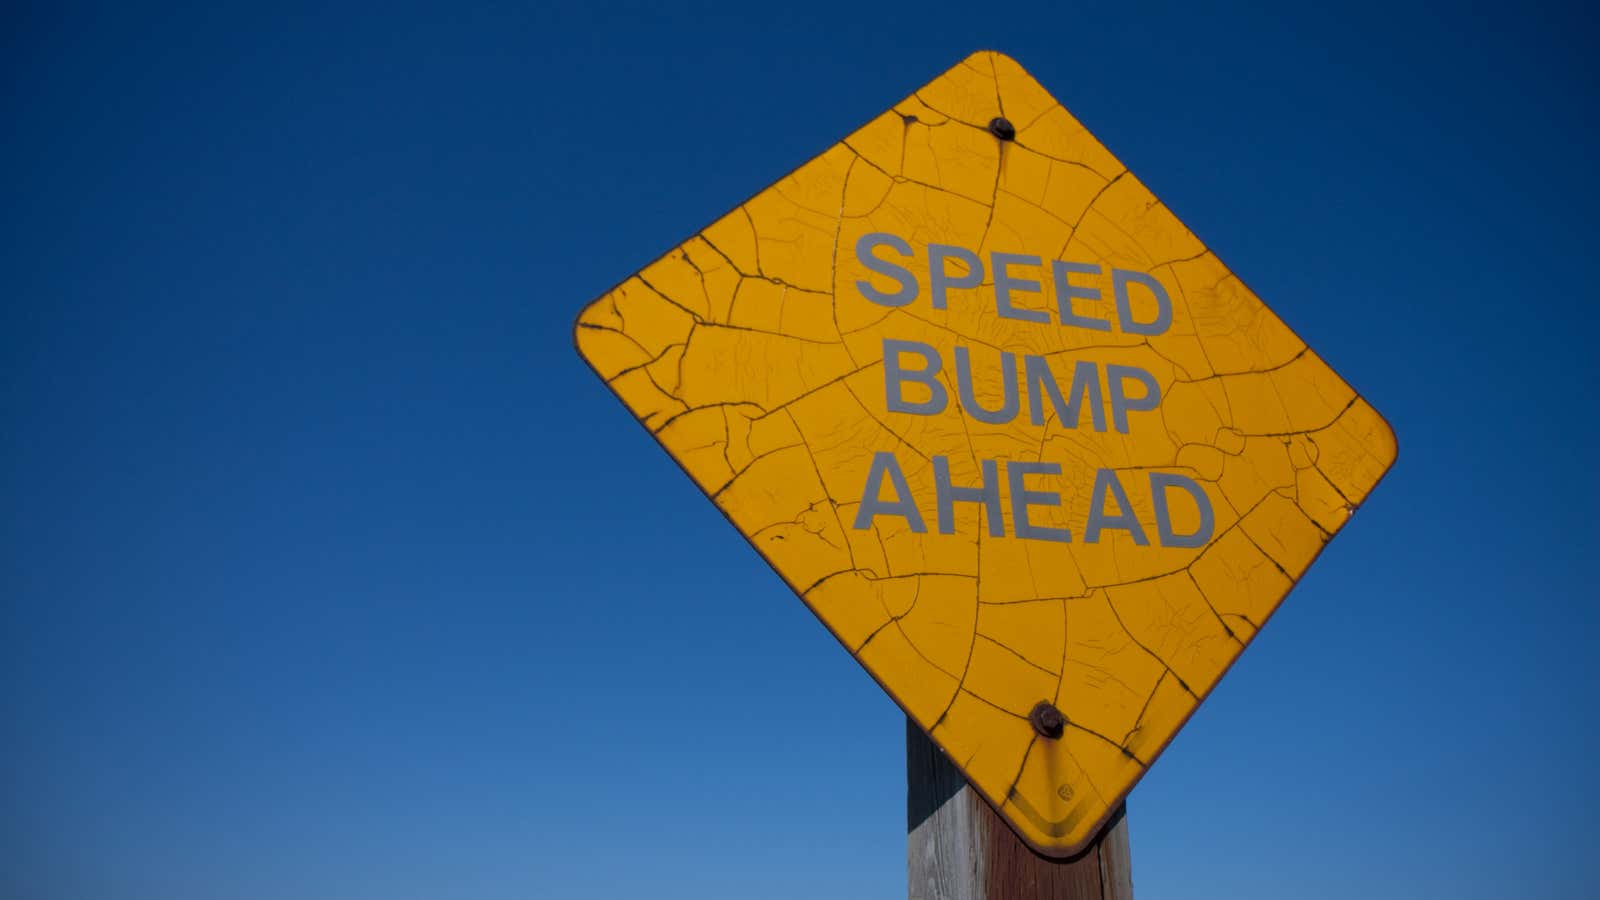 The stock market is getting its first speed bump.